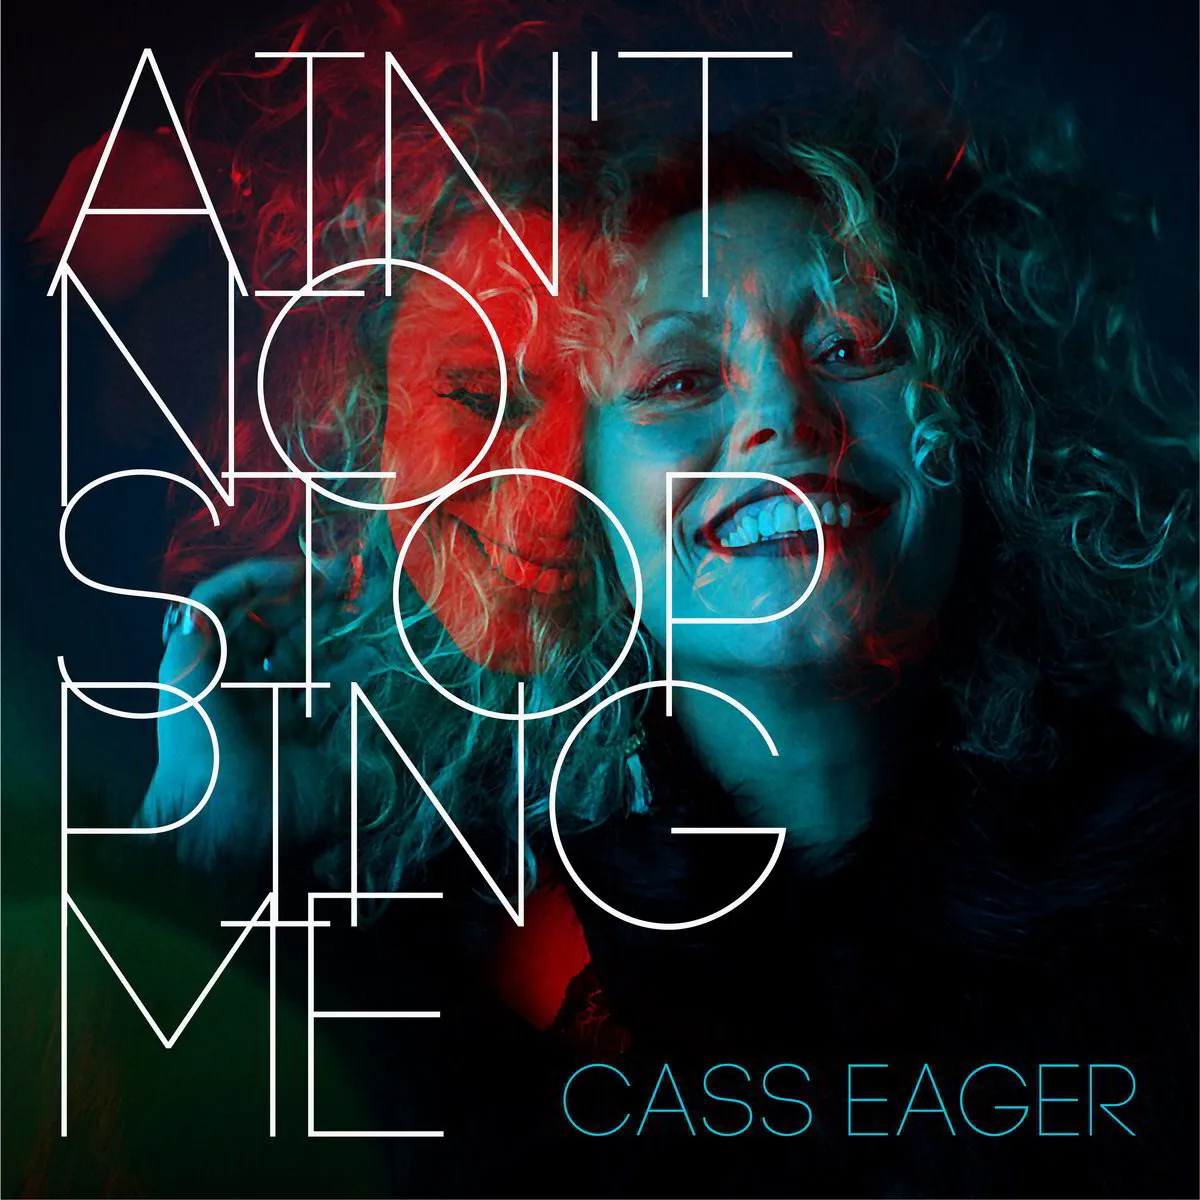 Cass Eager - Ain't No Stopping Me